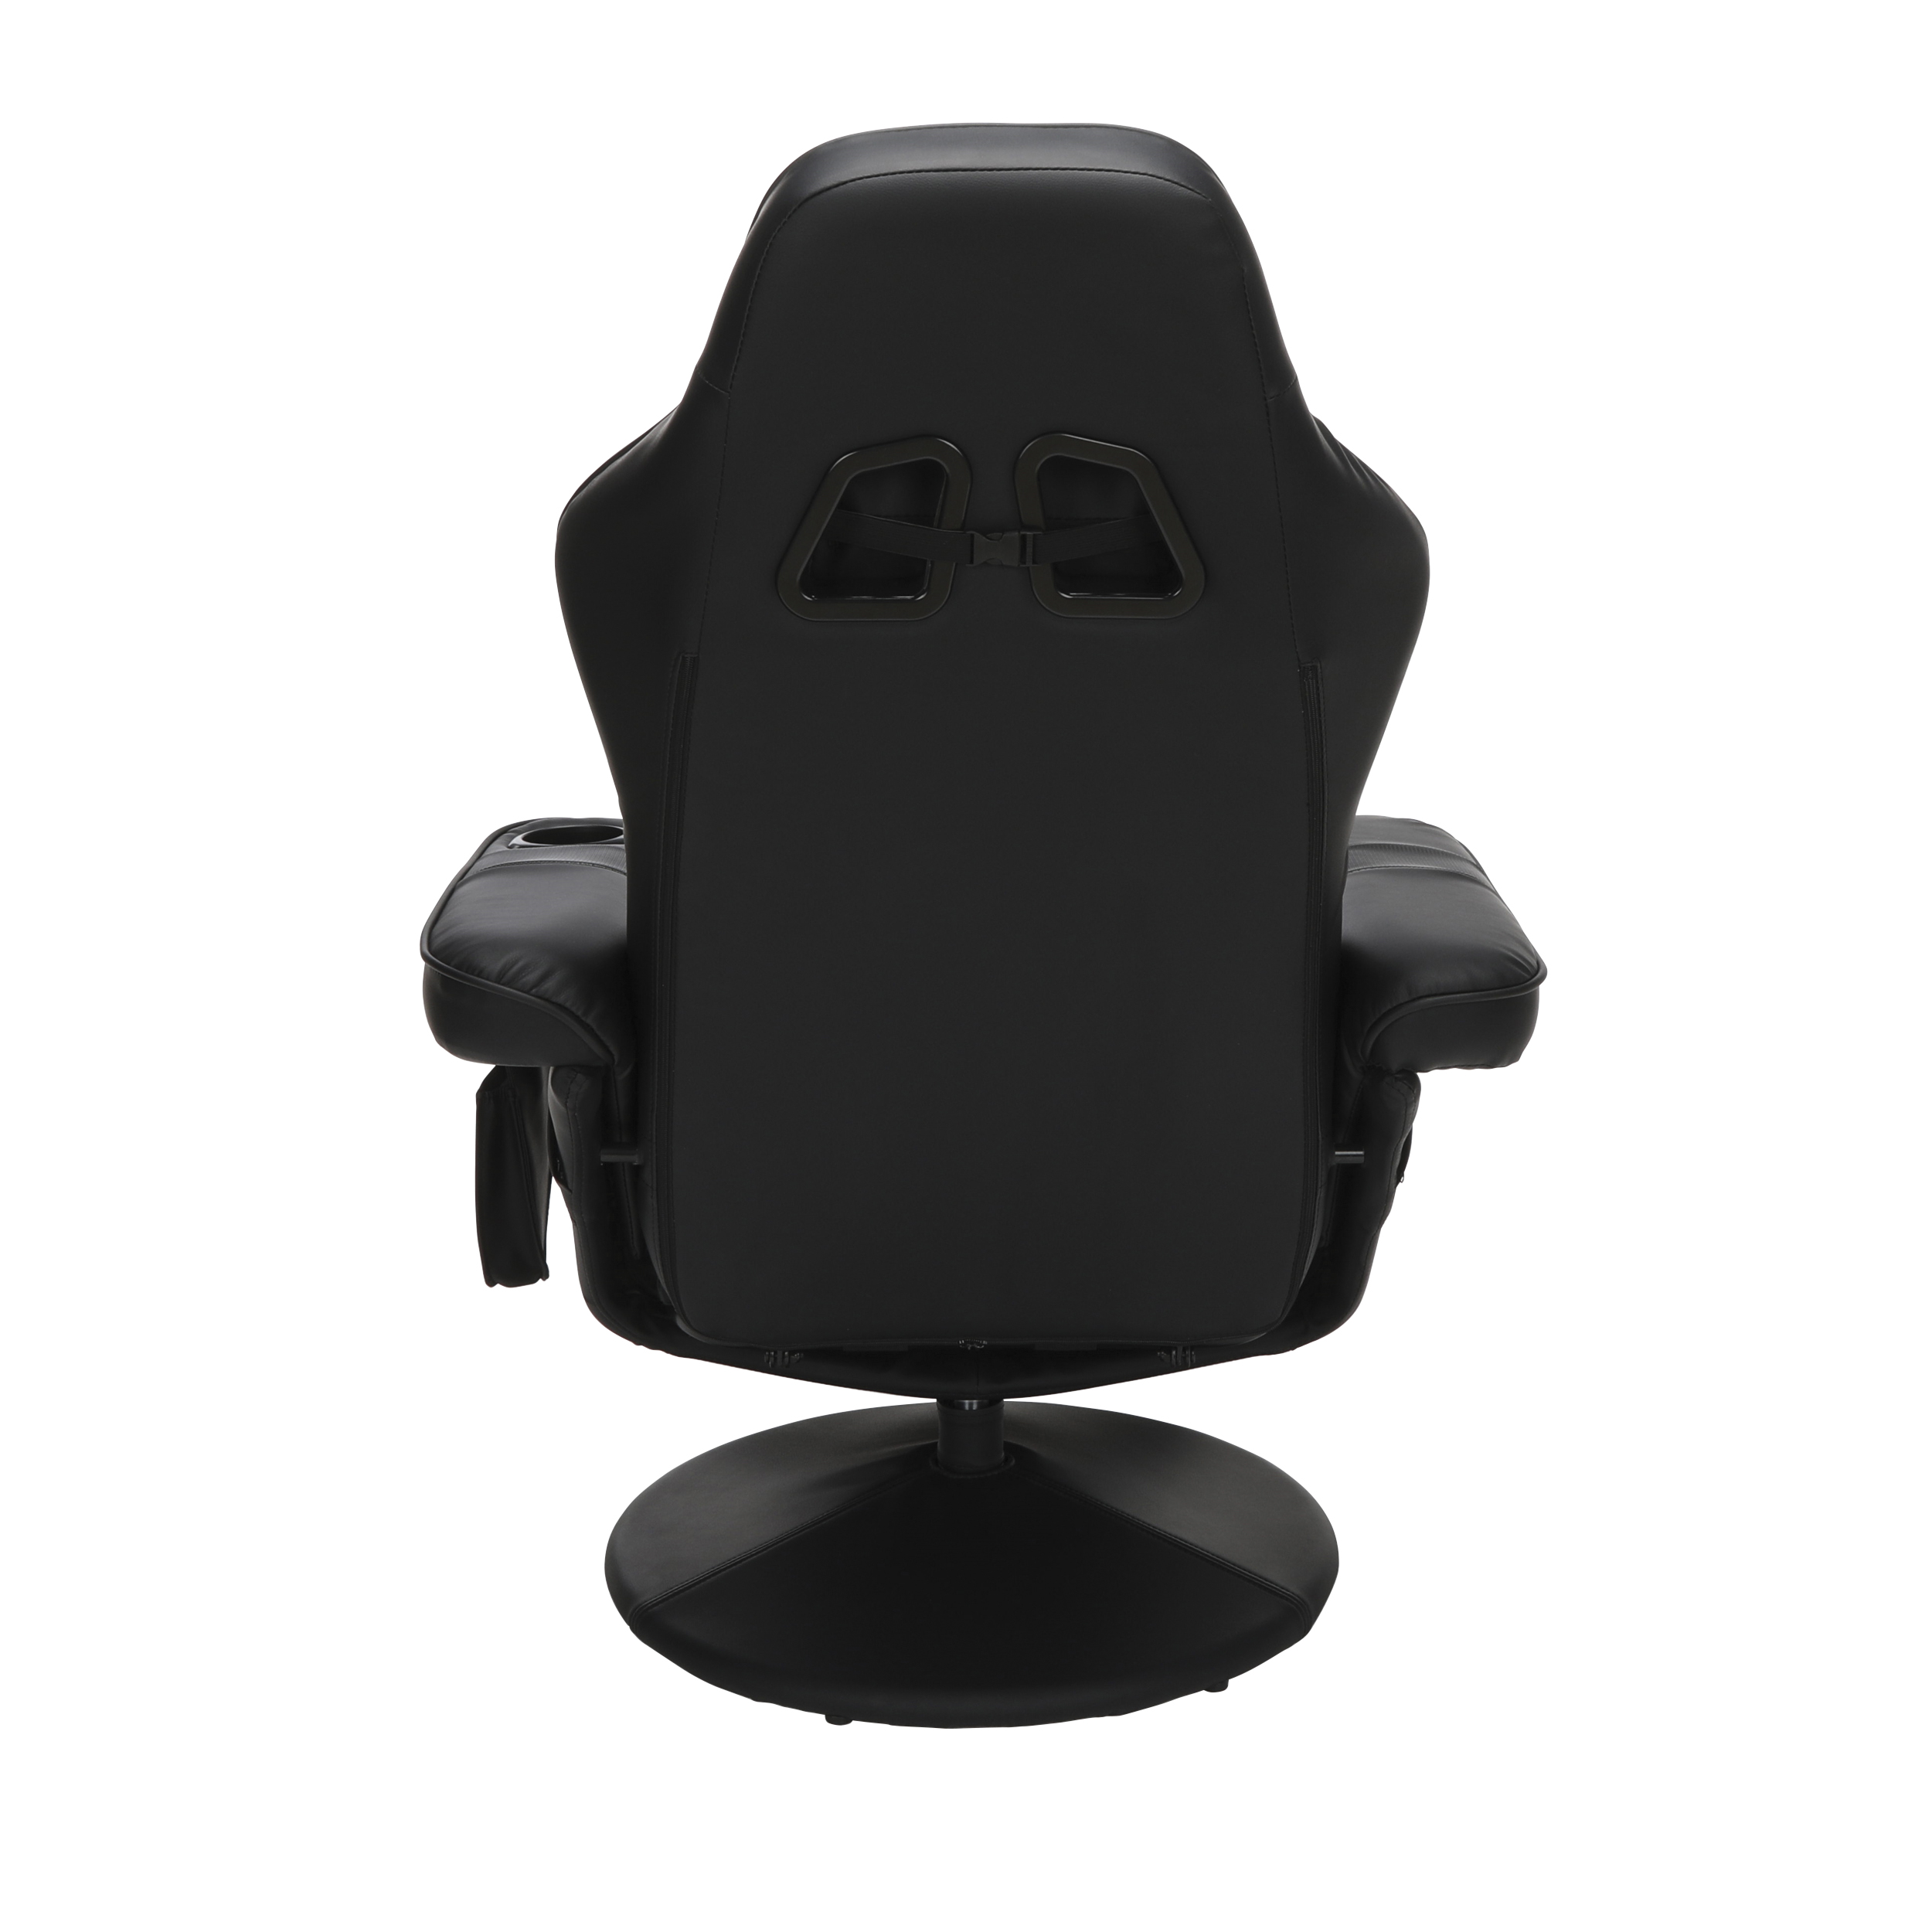 RESPAWN 900 Gaming Recliner - Video Games Console Recliner Chair, Computer Recliner, Adjustable Leg Rest and Recline, Recliner with Cupholder, Reclining Gaming Chair with Footrest - Black - image 5 of 10